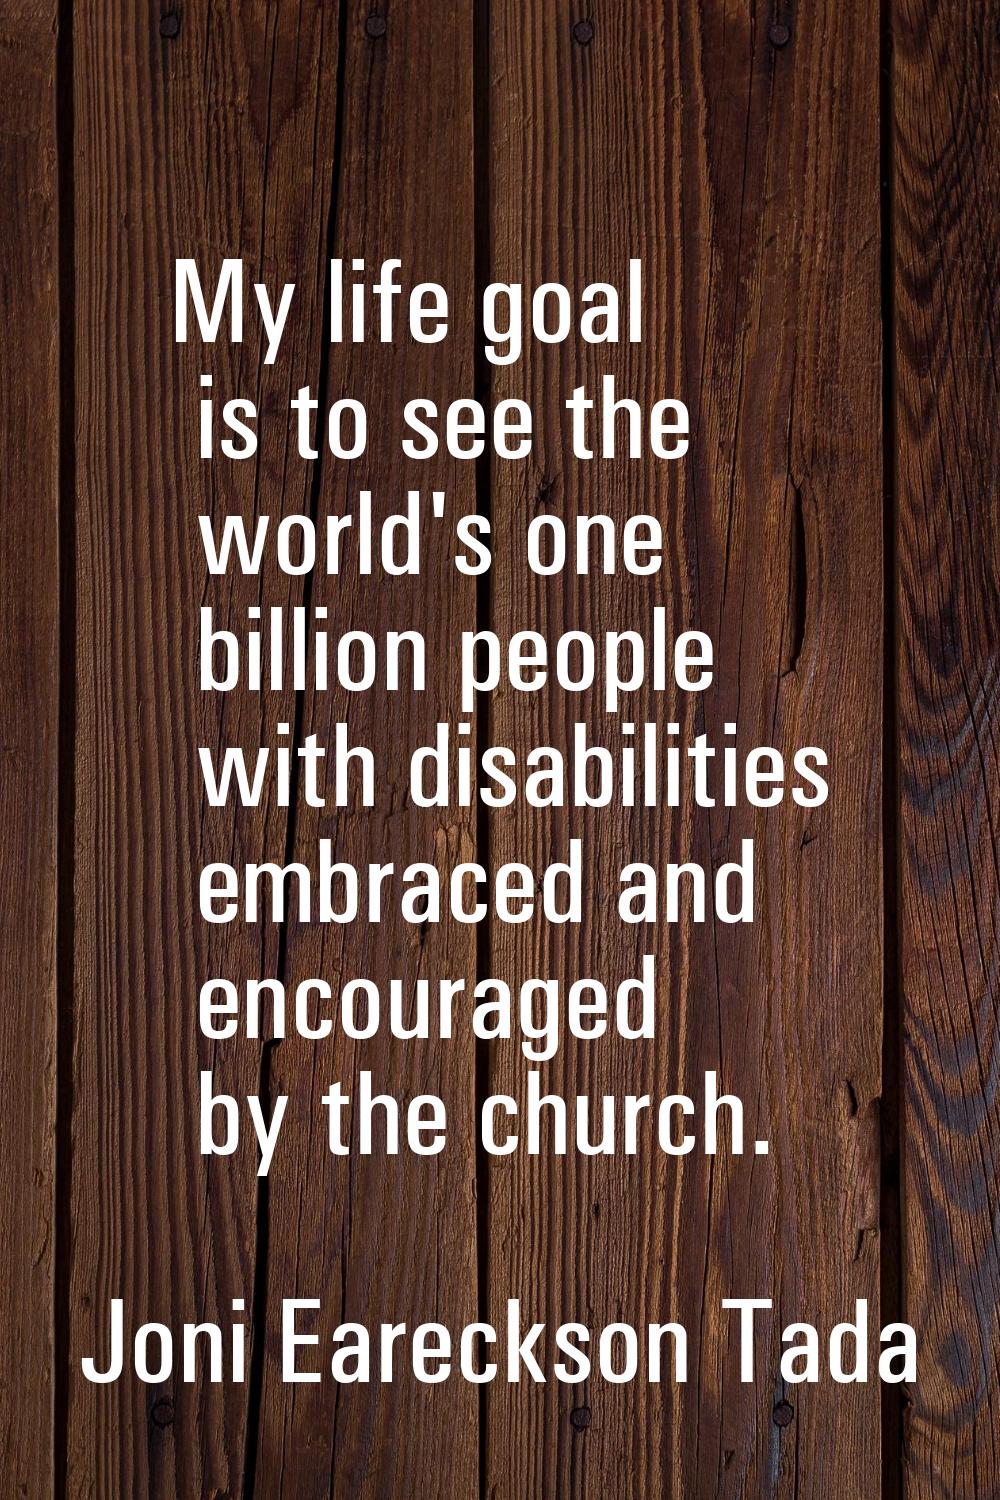 My life goal is to see the world's one billion people with disabilities embraced and encouraged by 